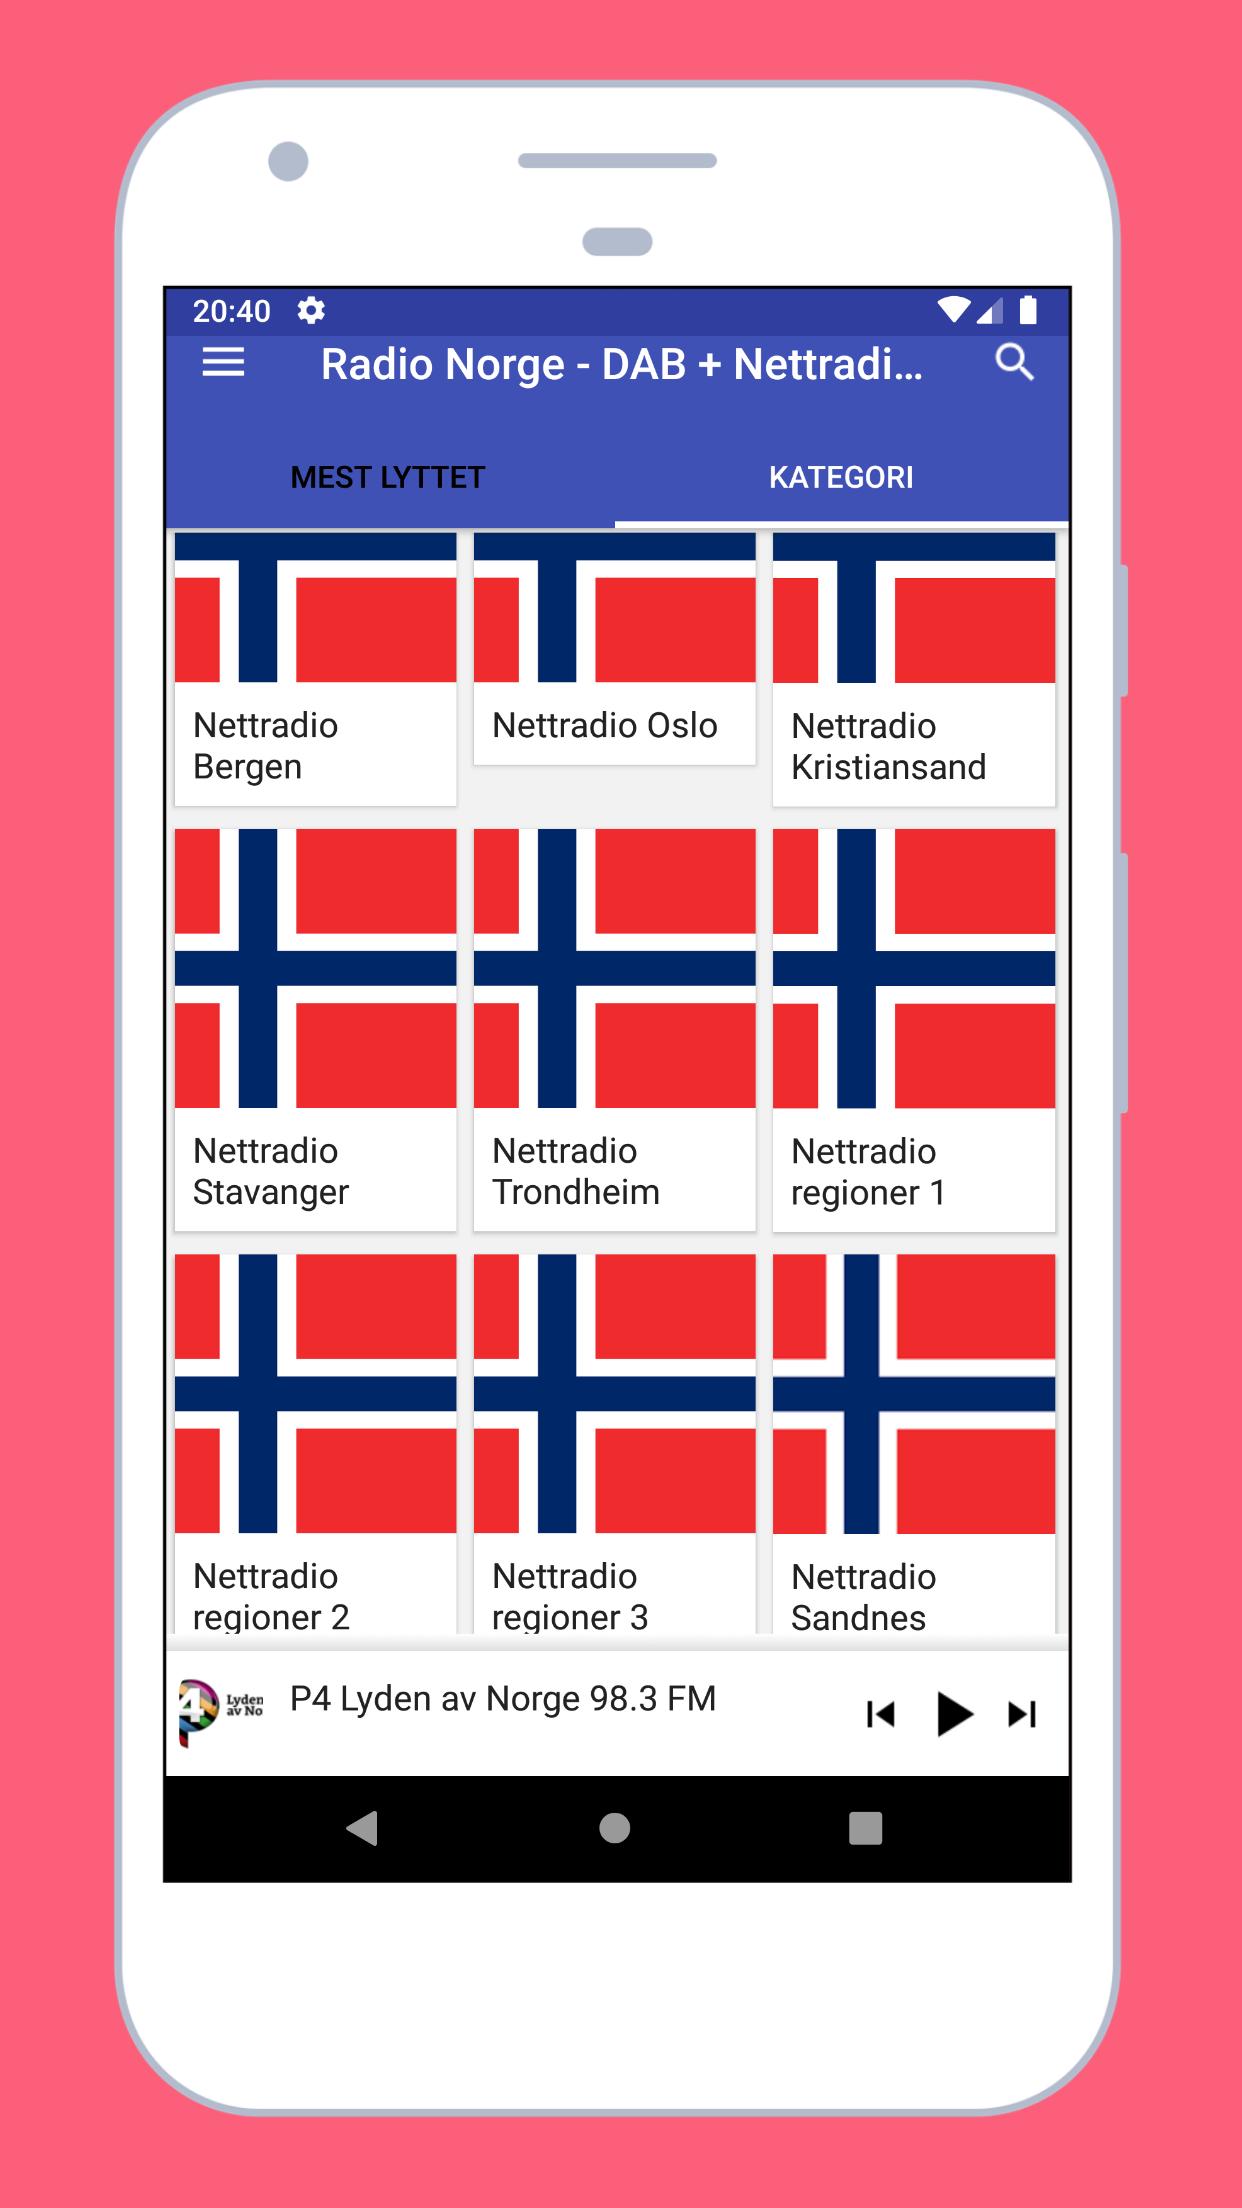 Radio Norge - DAB + Nettradio - Radio FM Norge App for Android - APK  Download